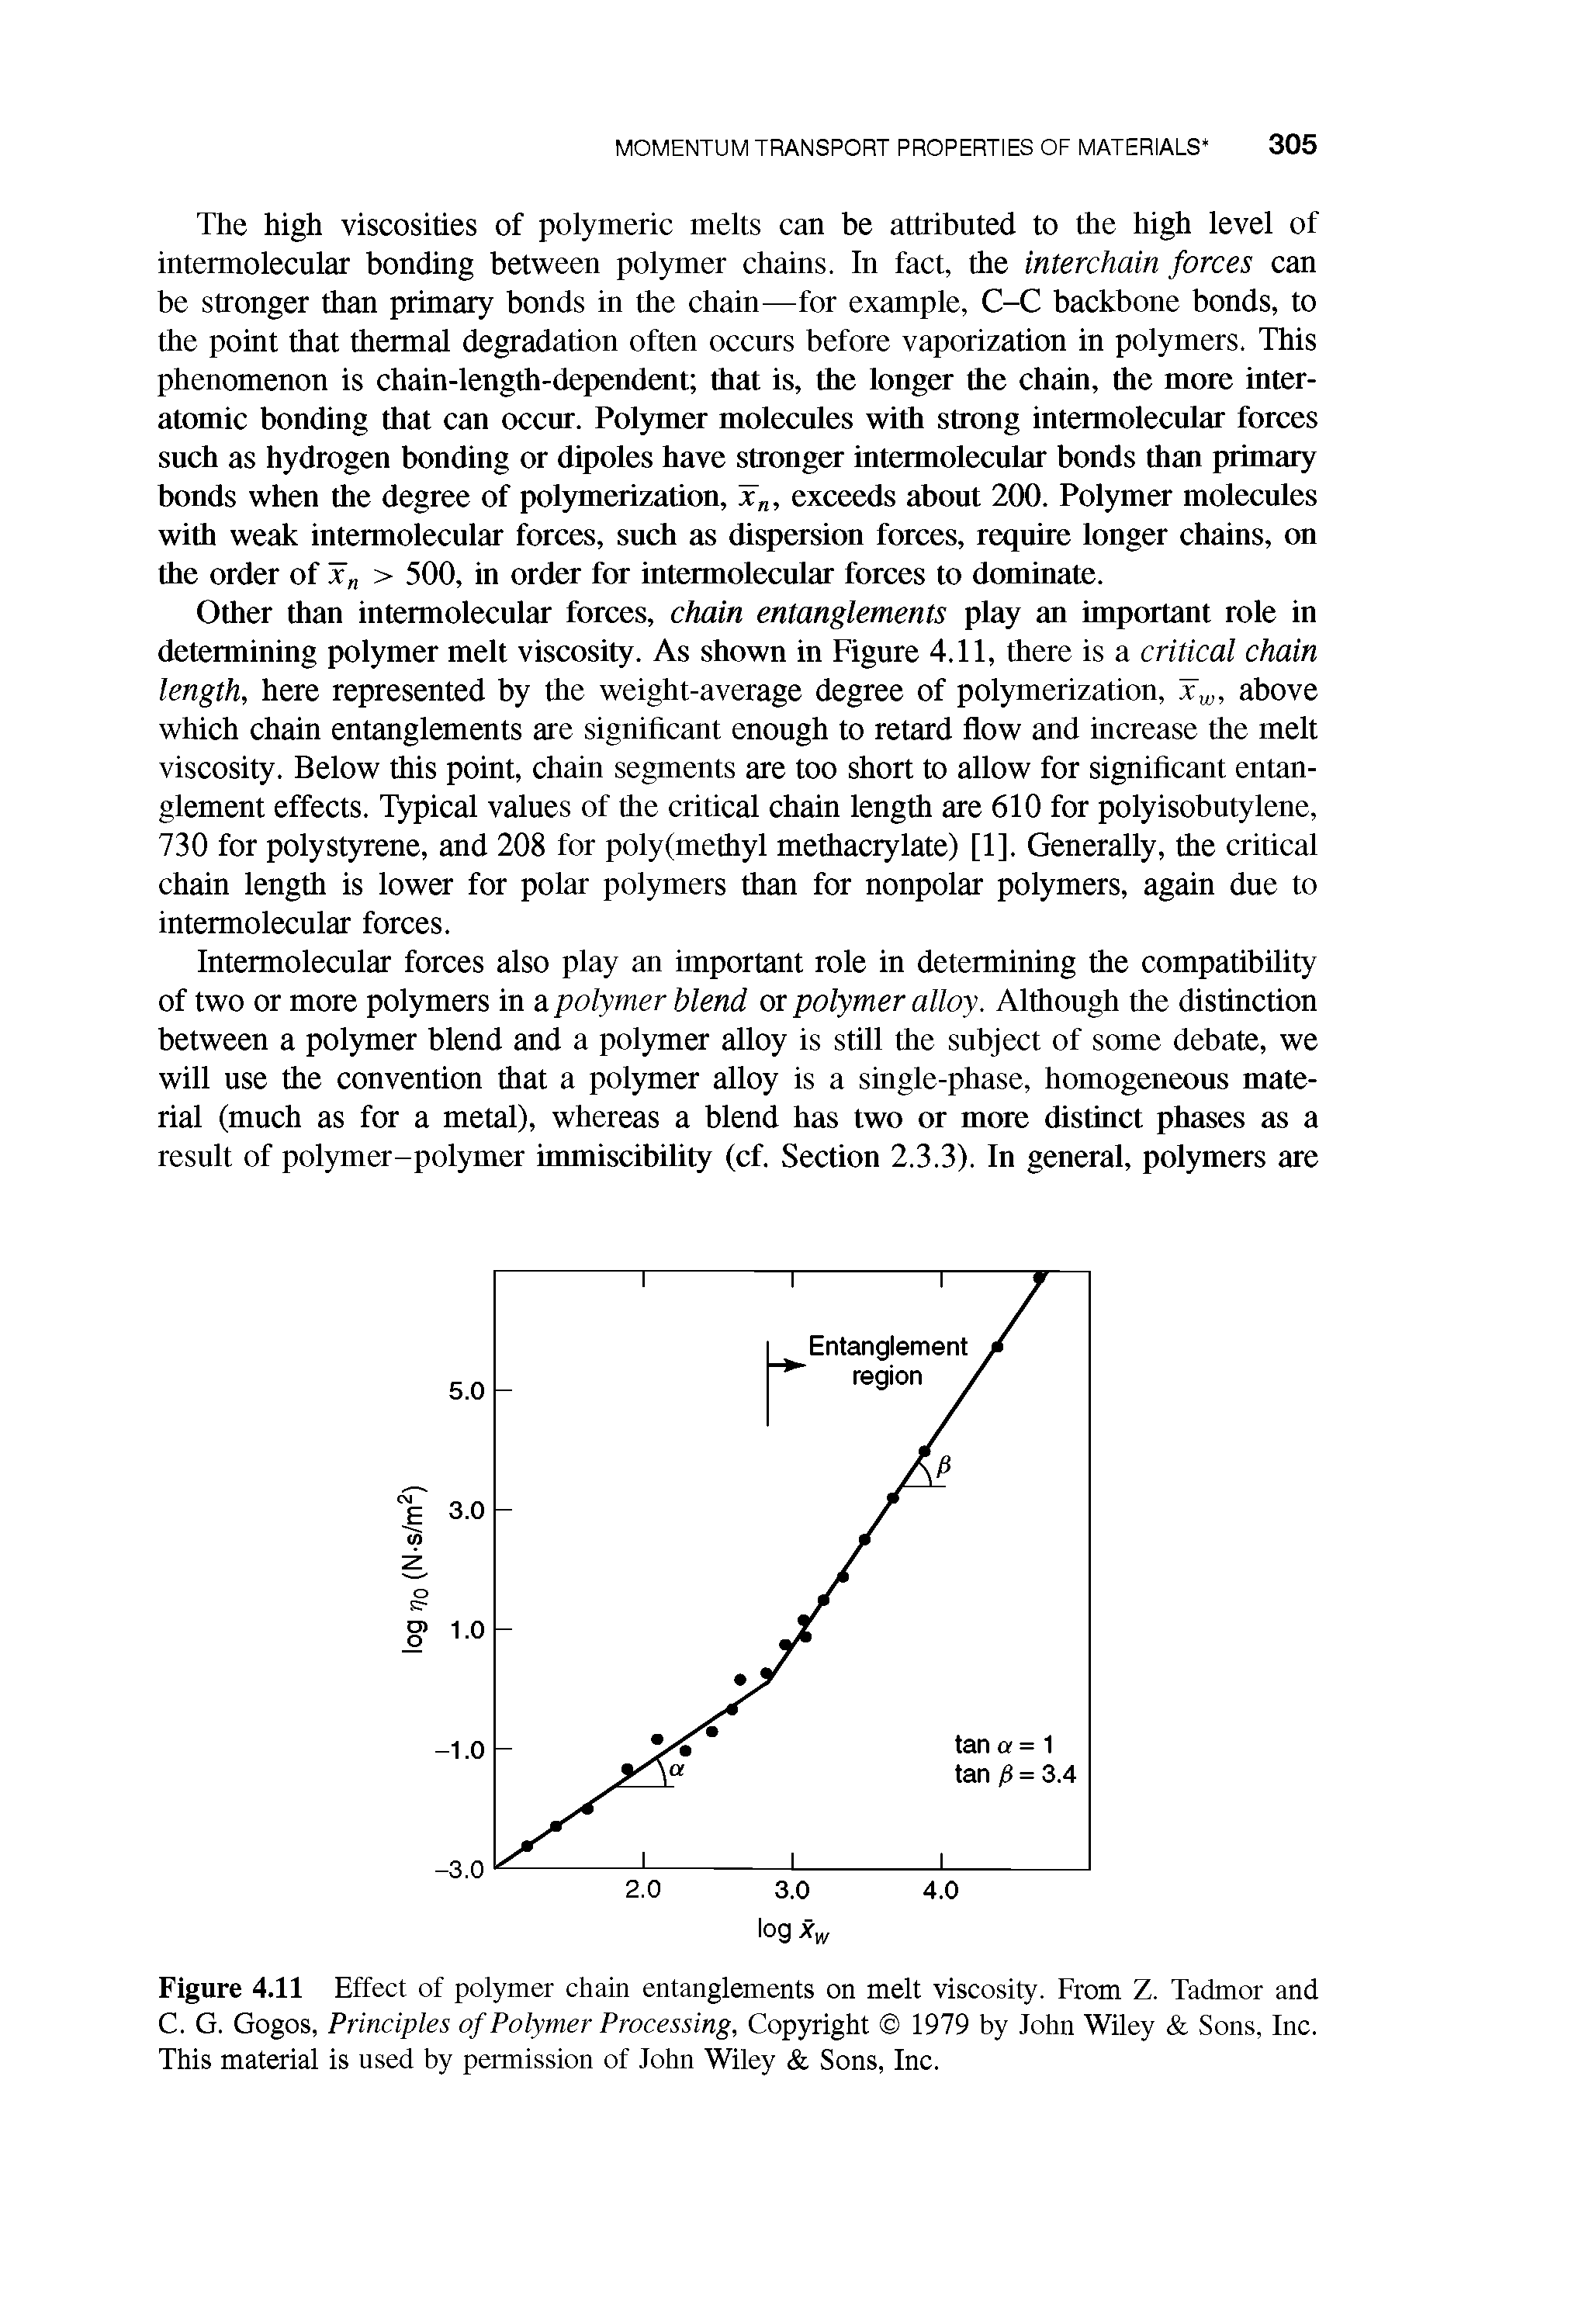 Figure 4.11 Effect of polymer chain entanglements on melt viscosity. From Z. Tadmor and C. G. Gogos, Principles of Polymer Processing, Copyright 1979 by John Wiley Sons, Inc. This material is used by permission of John Wiley Sons, Inc.